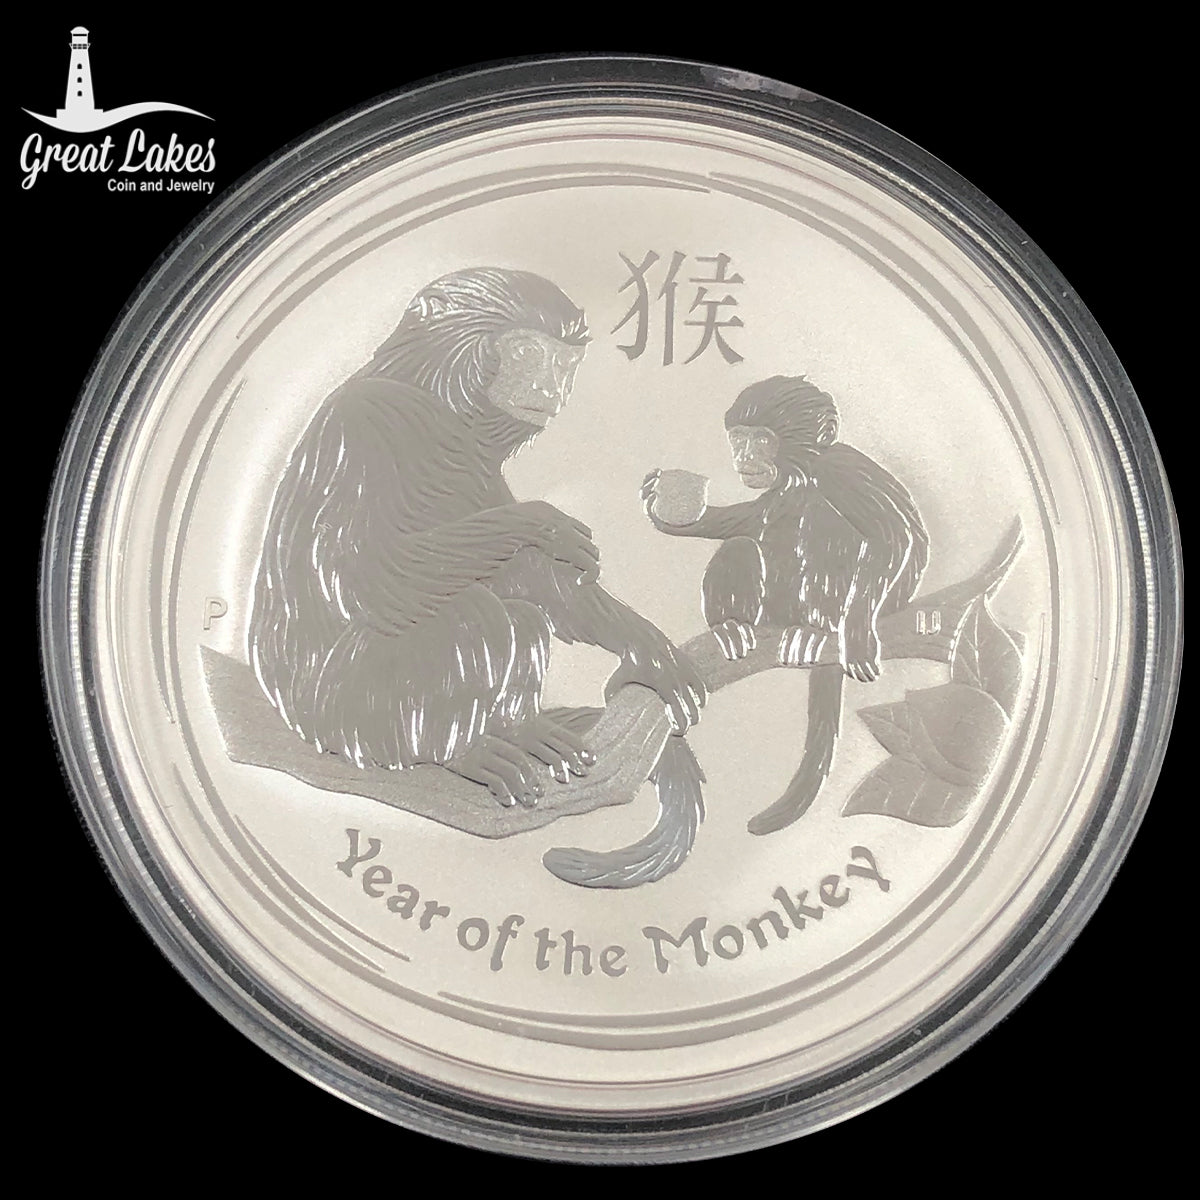 Perth Mint 2016 Year of the Monkey 1 oz Silver Coin